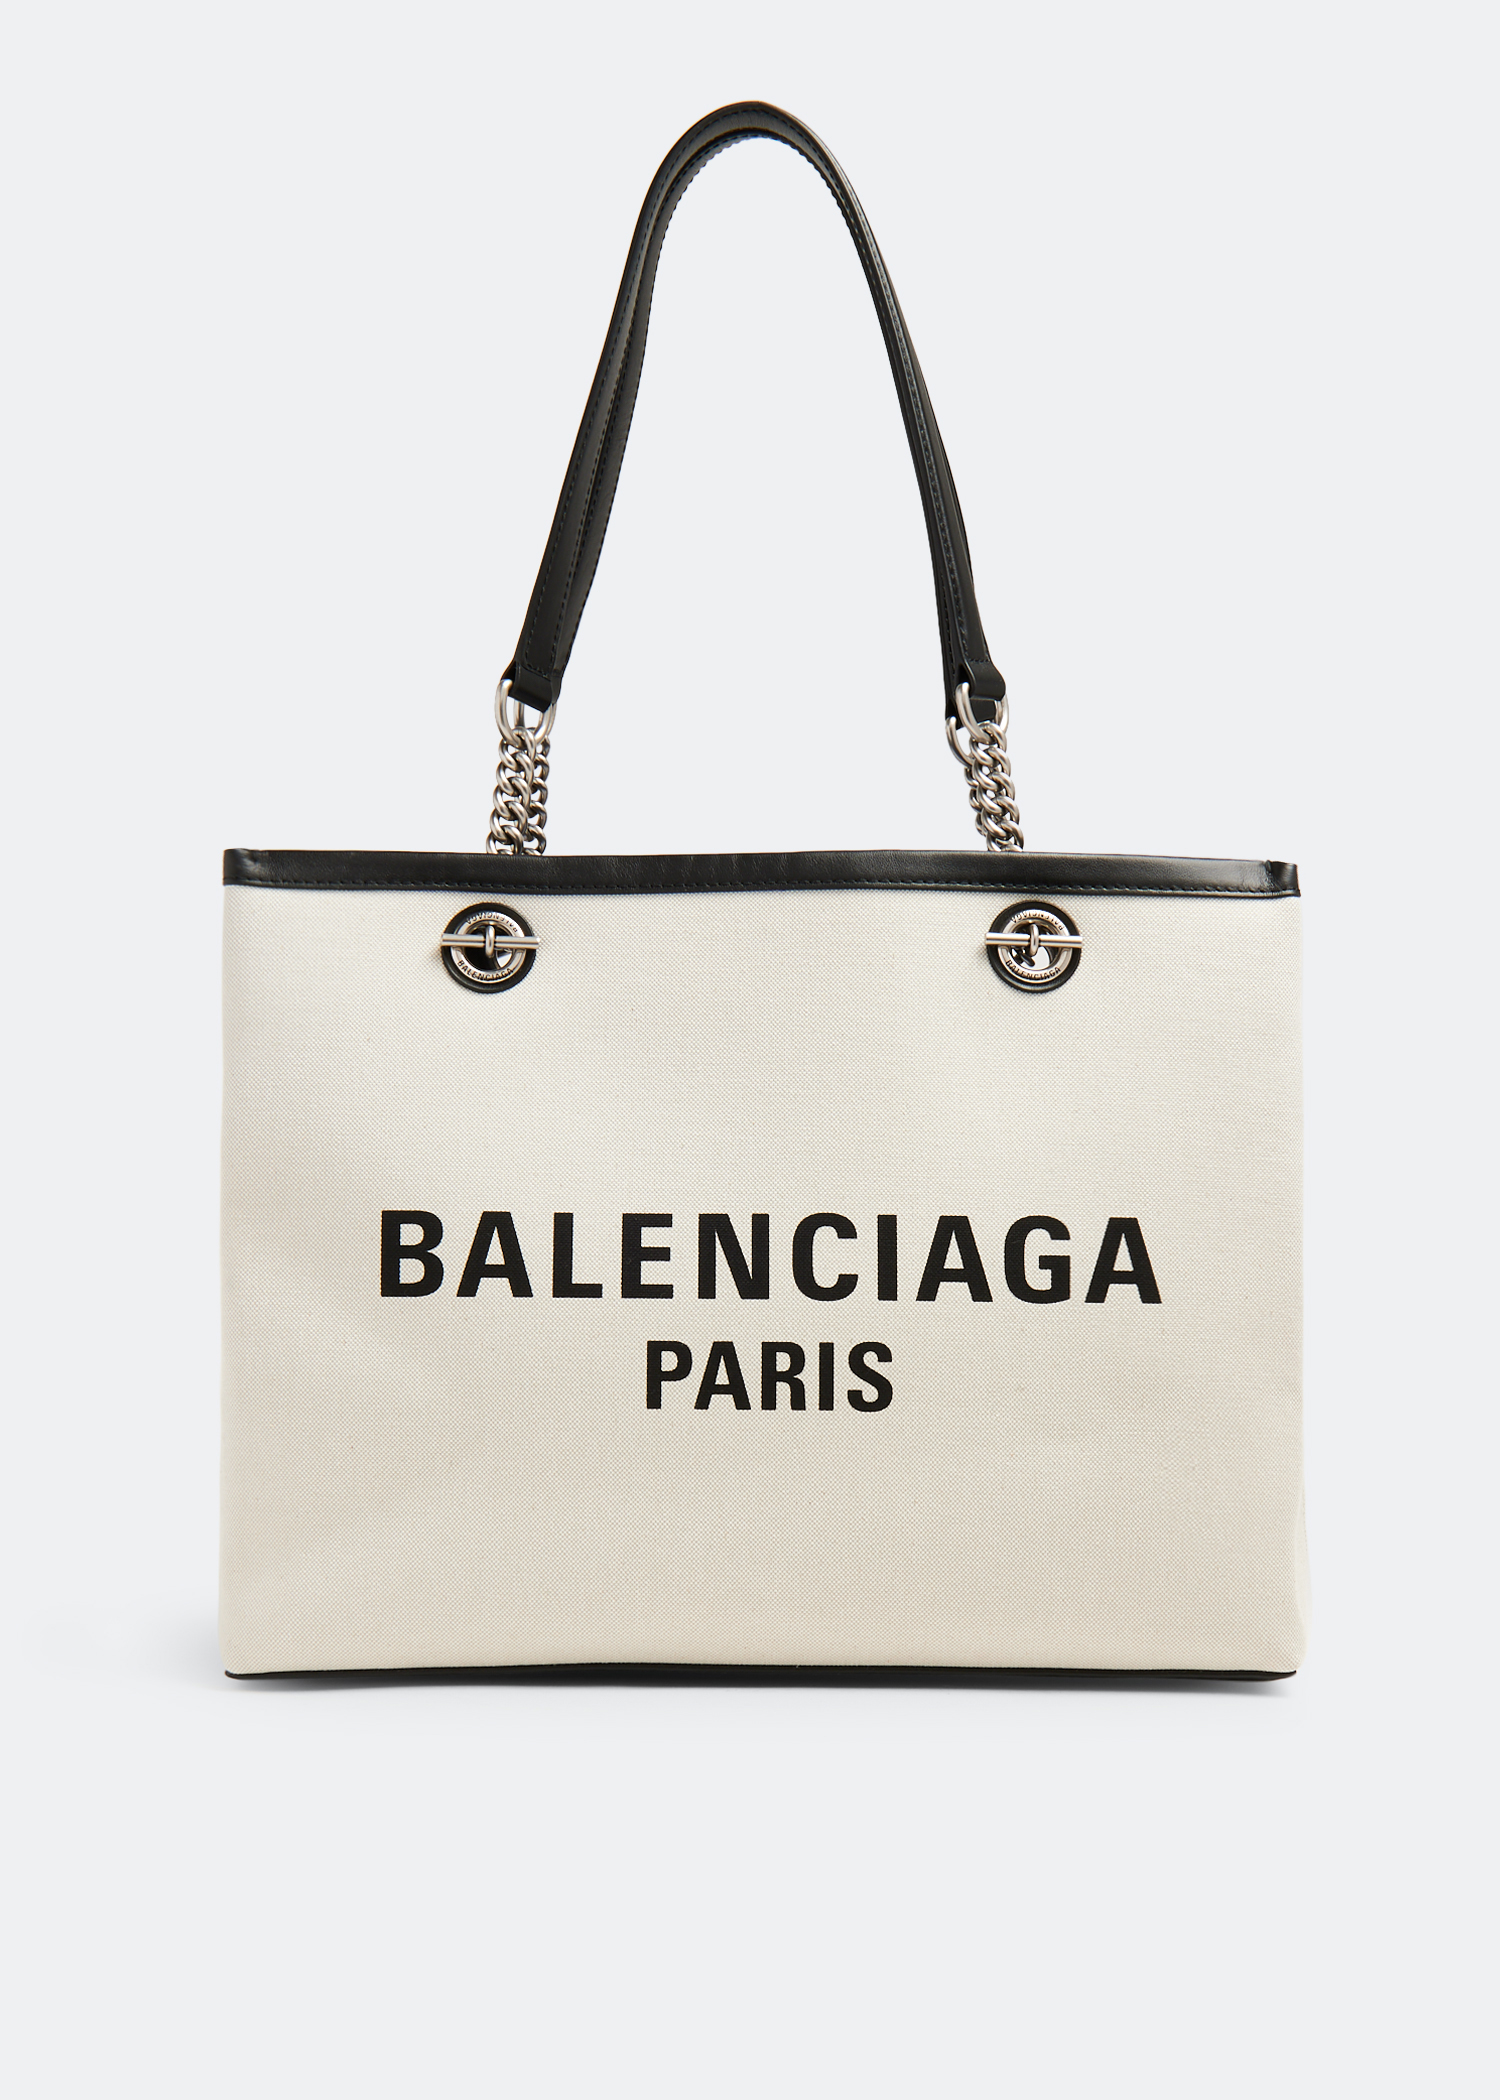 BALENCIAGA Tote Bag white white canvas Small size Navy hippo S from japan  used | eBay